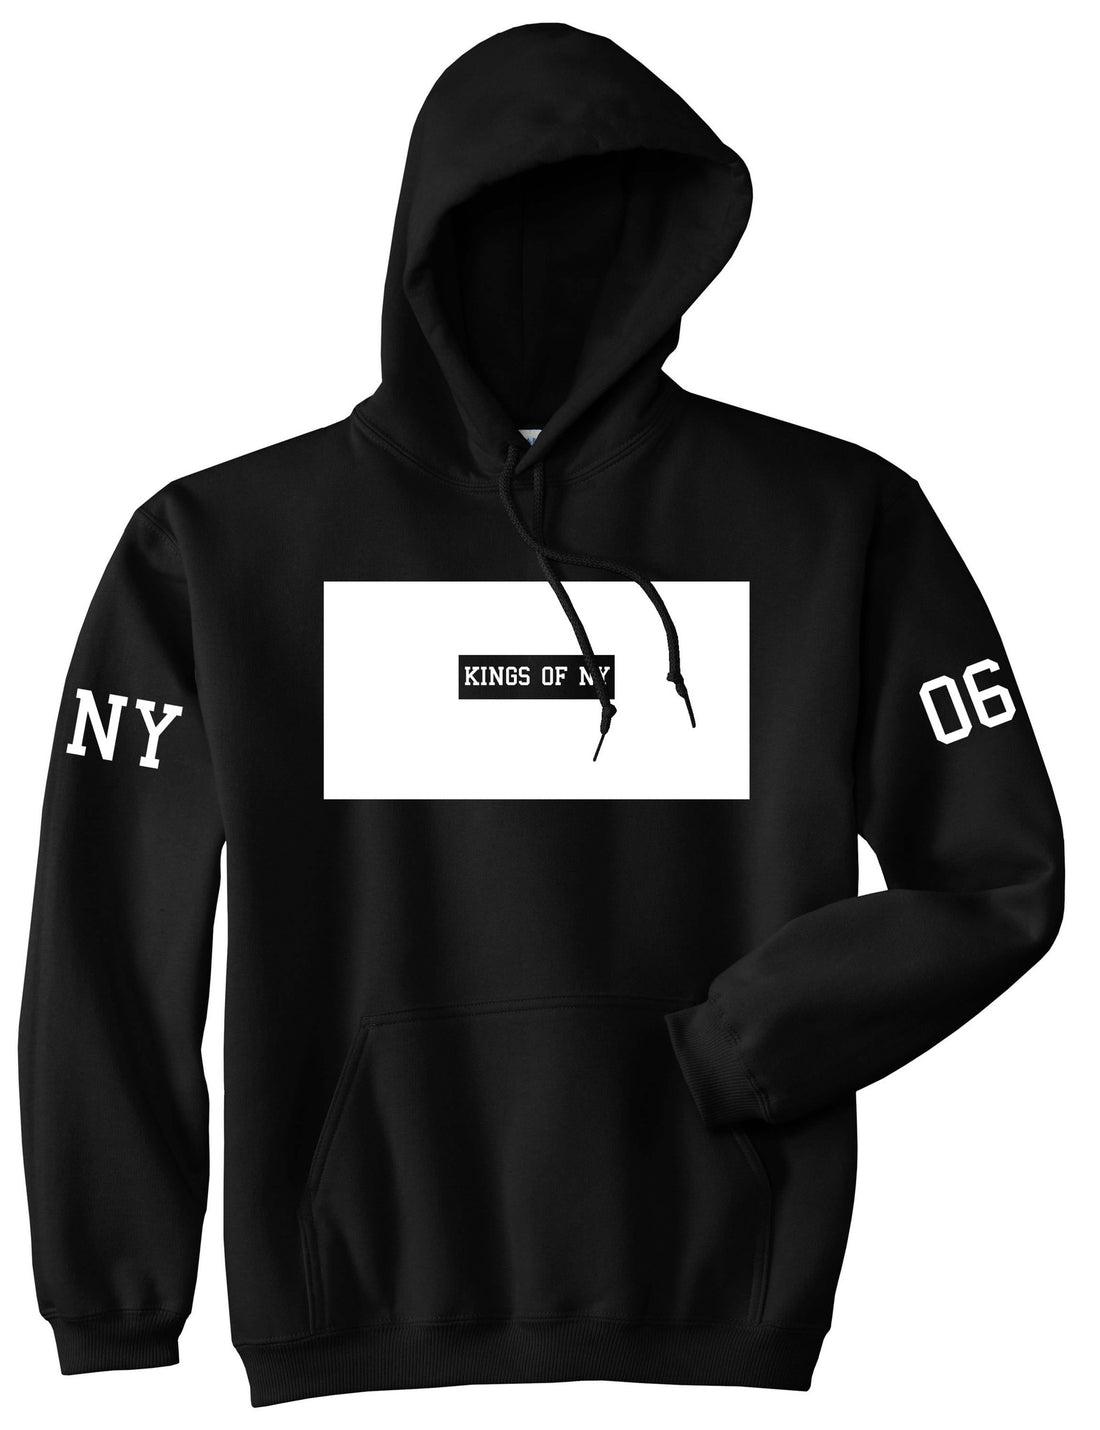 New York Logo 2006 Style Trill Boys Kids Pullover Hoodie Hoody In Black by Kings Of NY